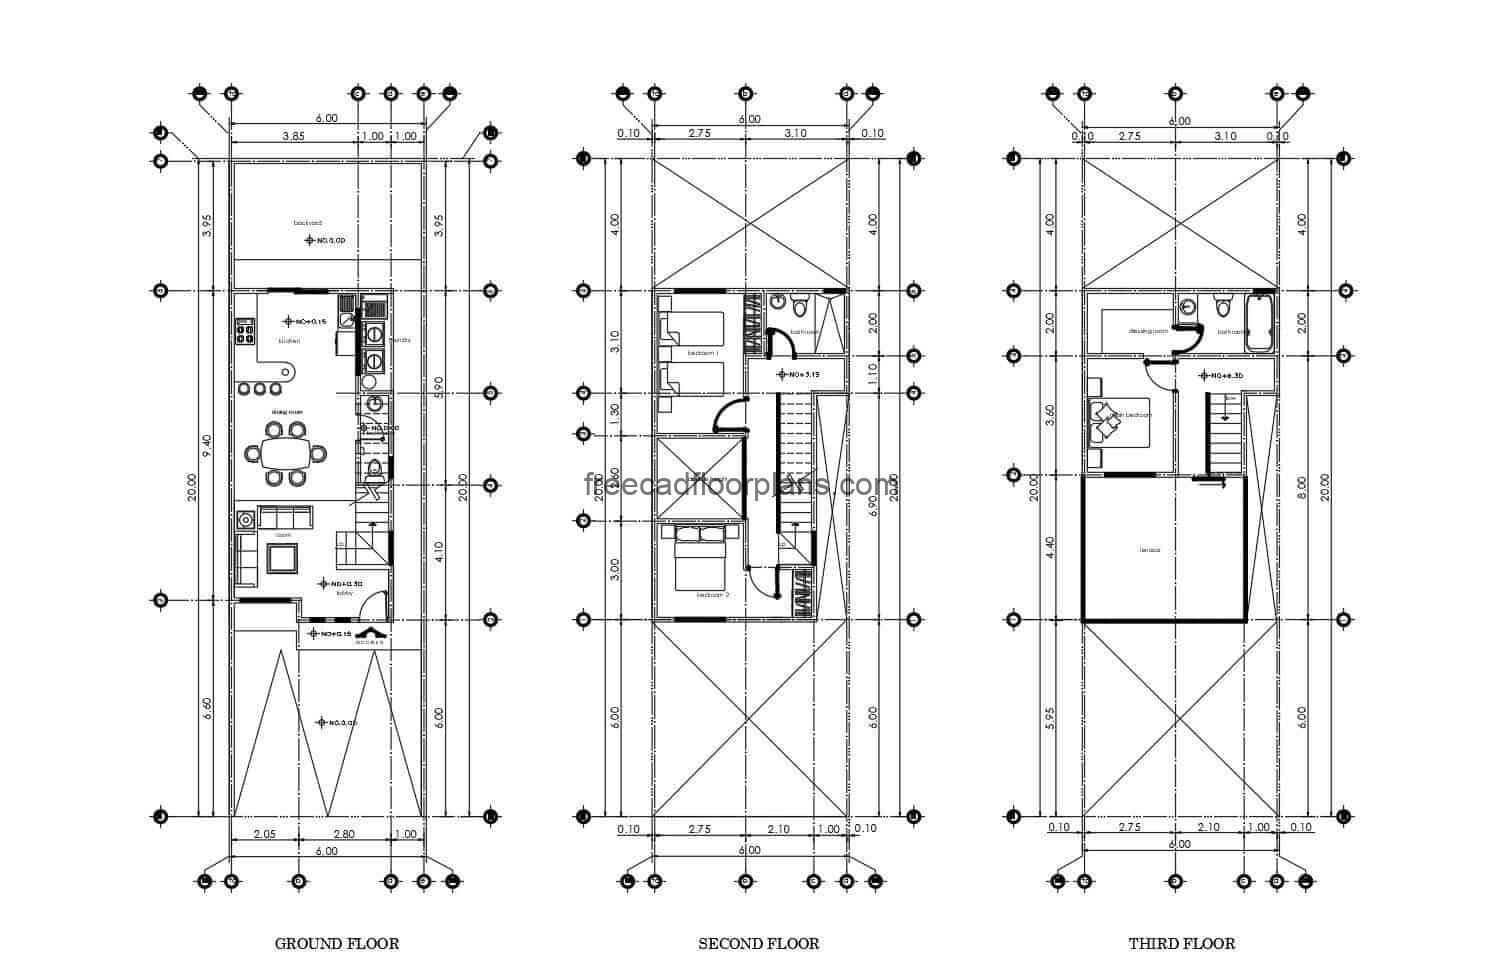 Plans in autocad of small elongated house of multiple levels, with two rooms.